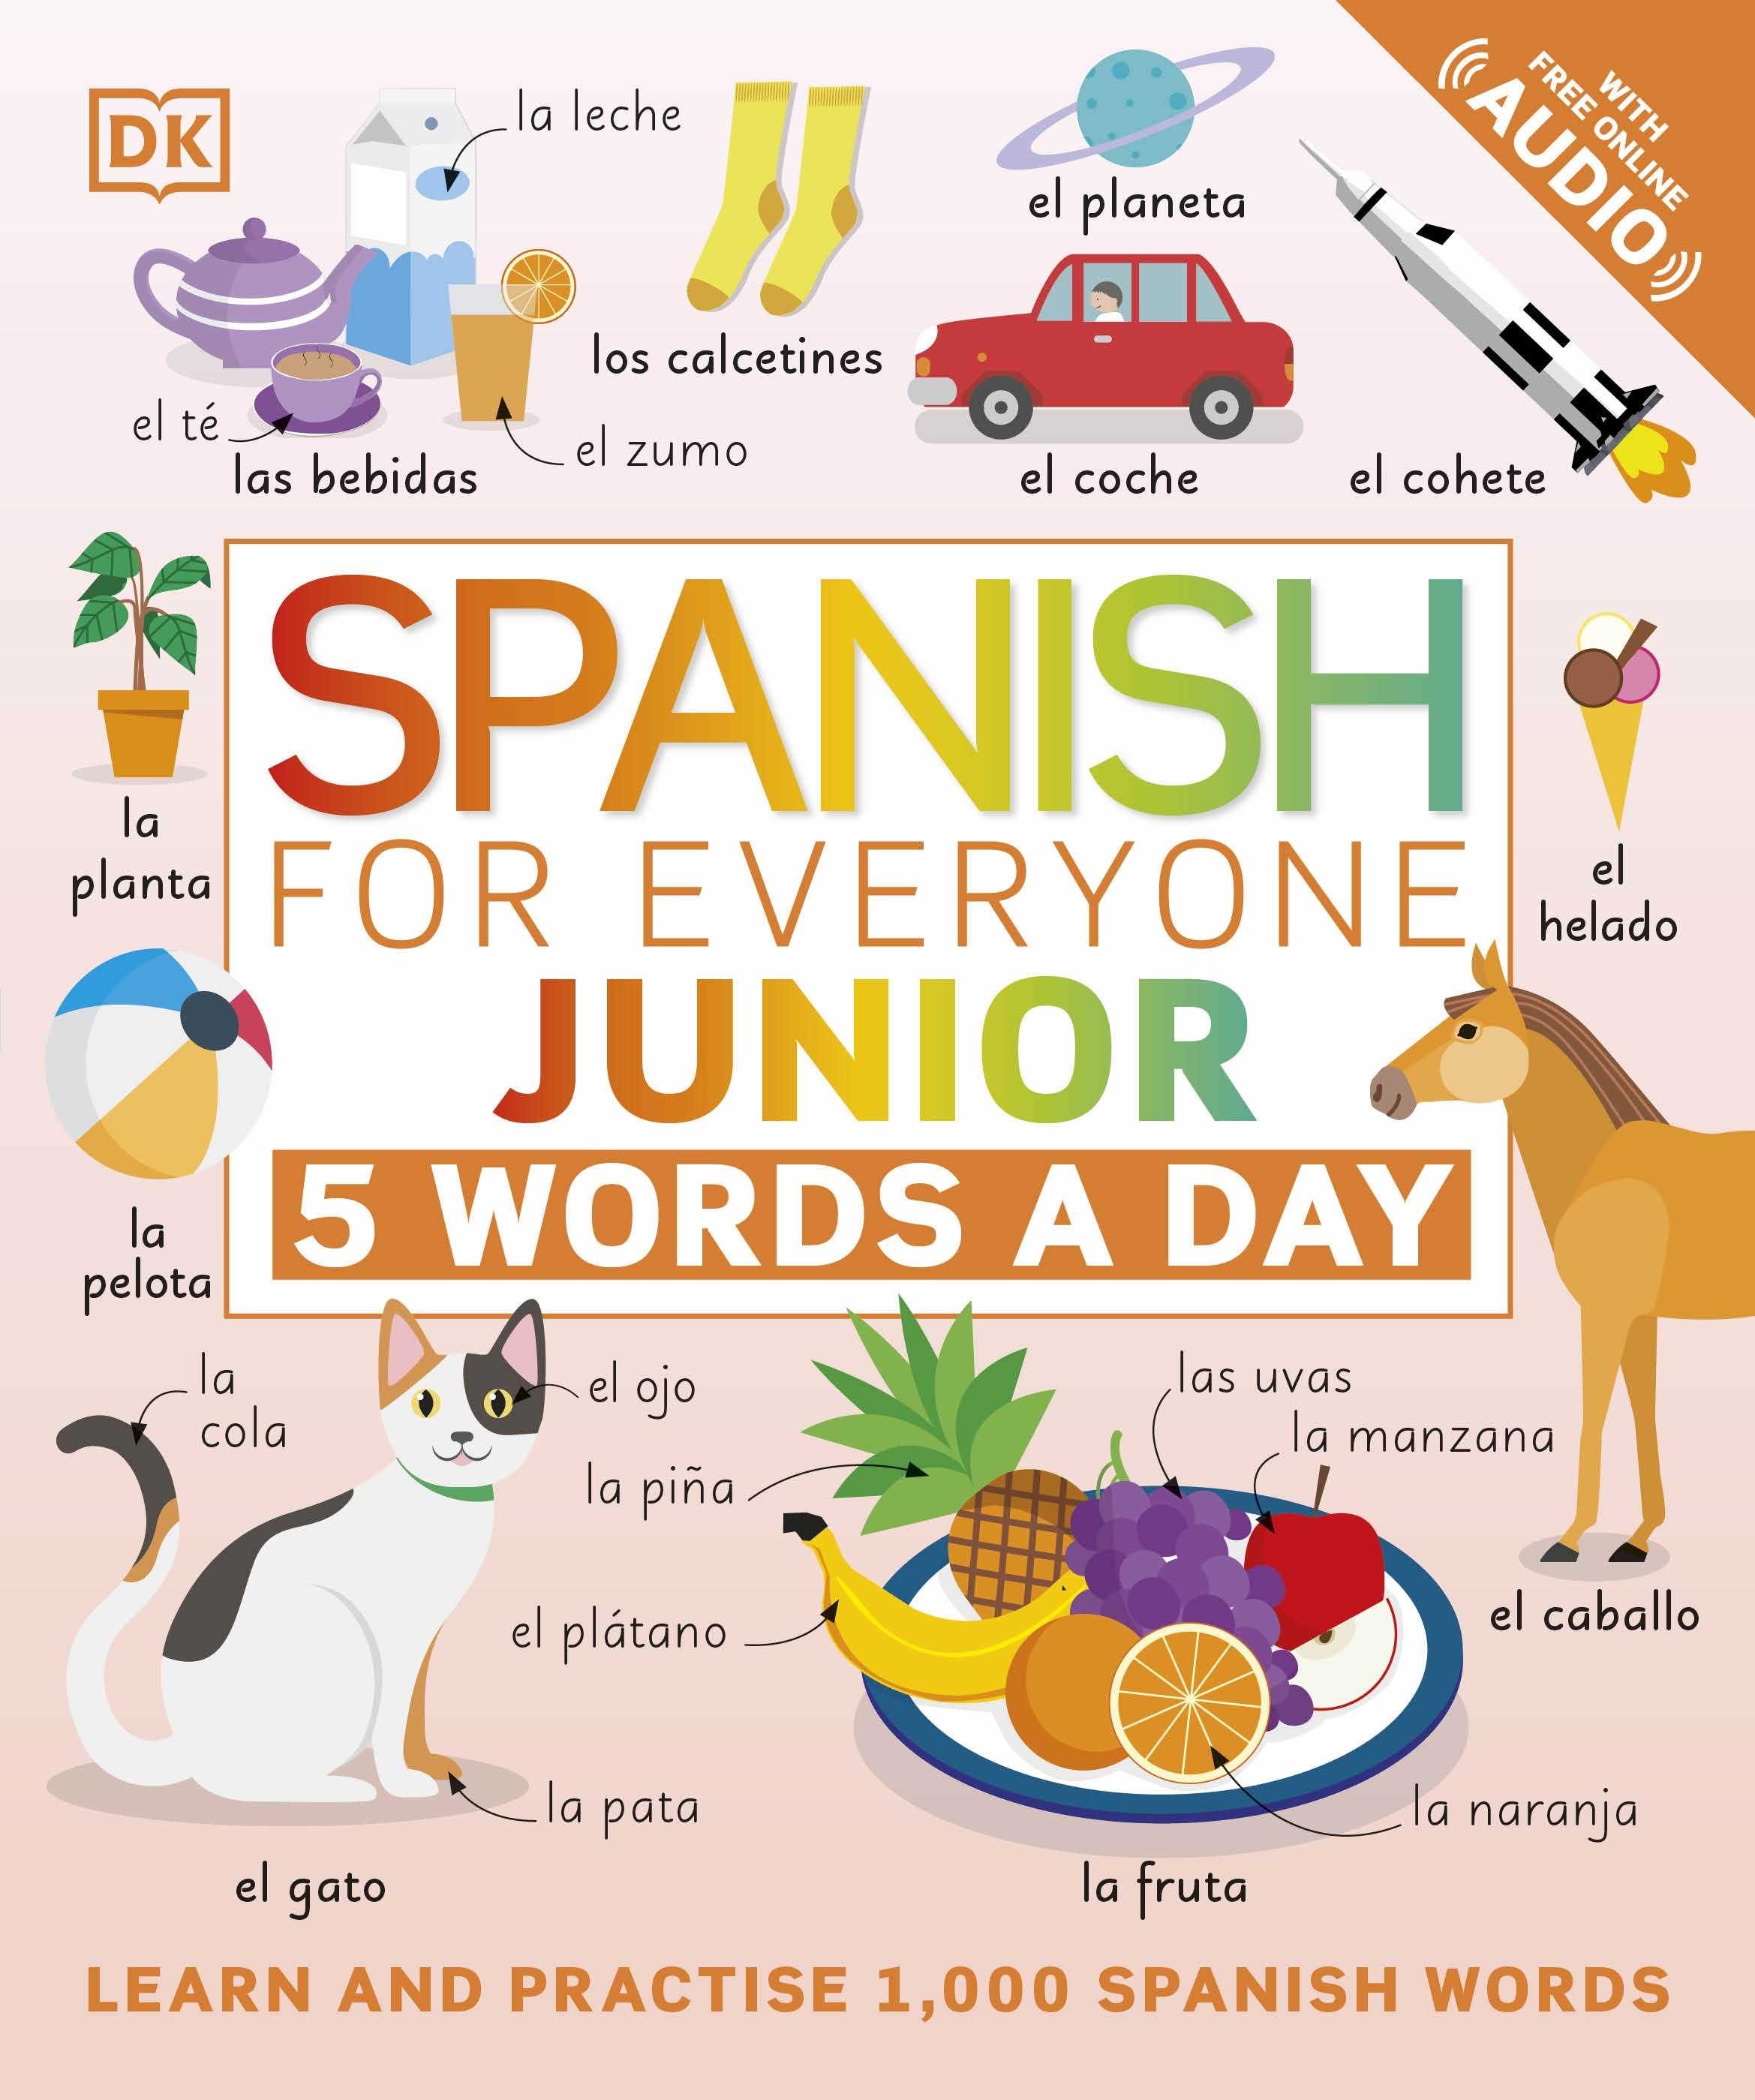 Spanish for Everyone Junior: 5 Words a Day